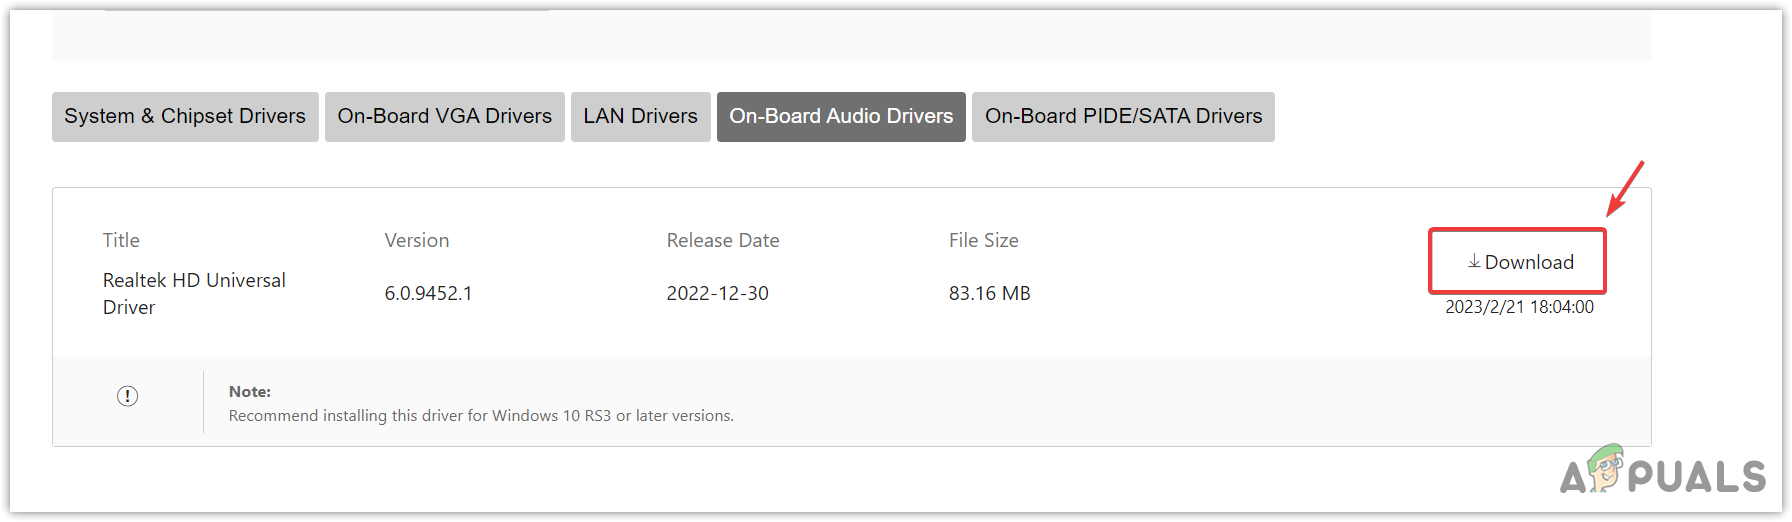 Downloading Audio drivers